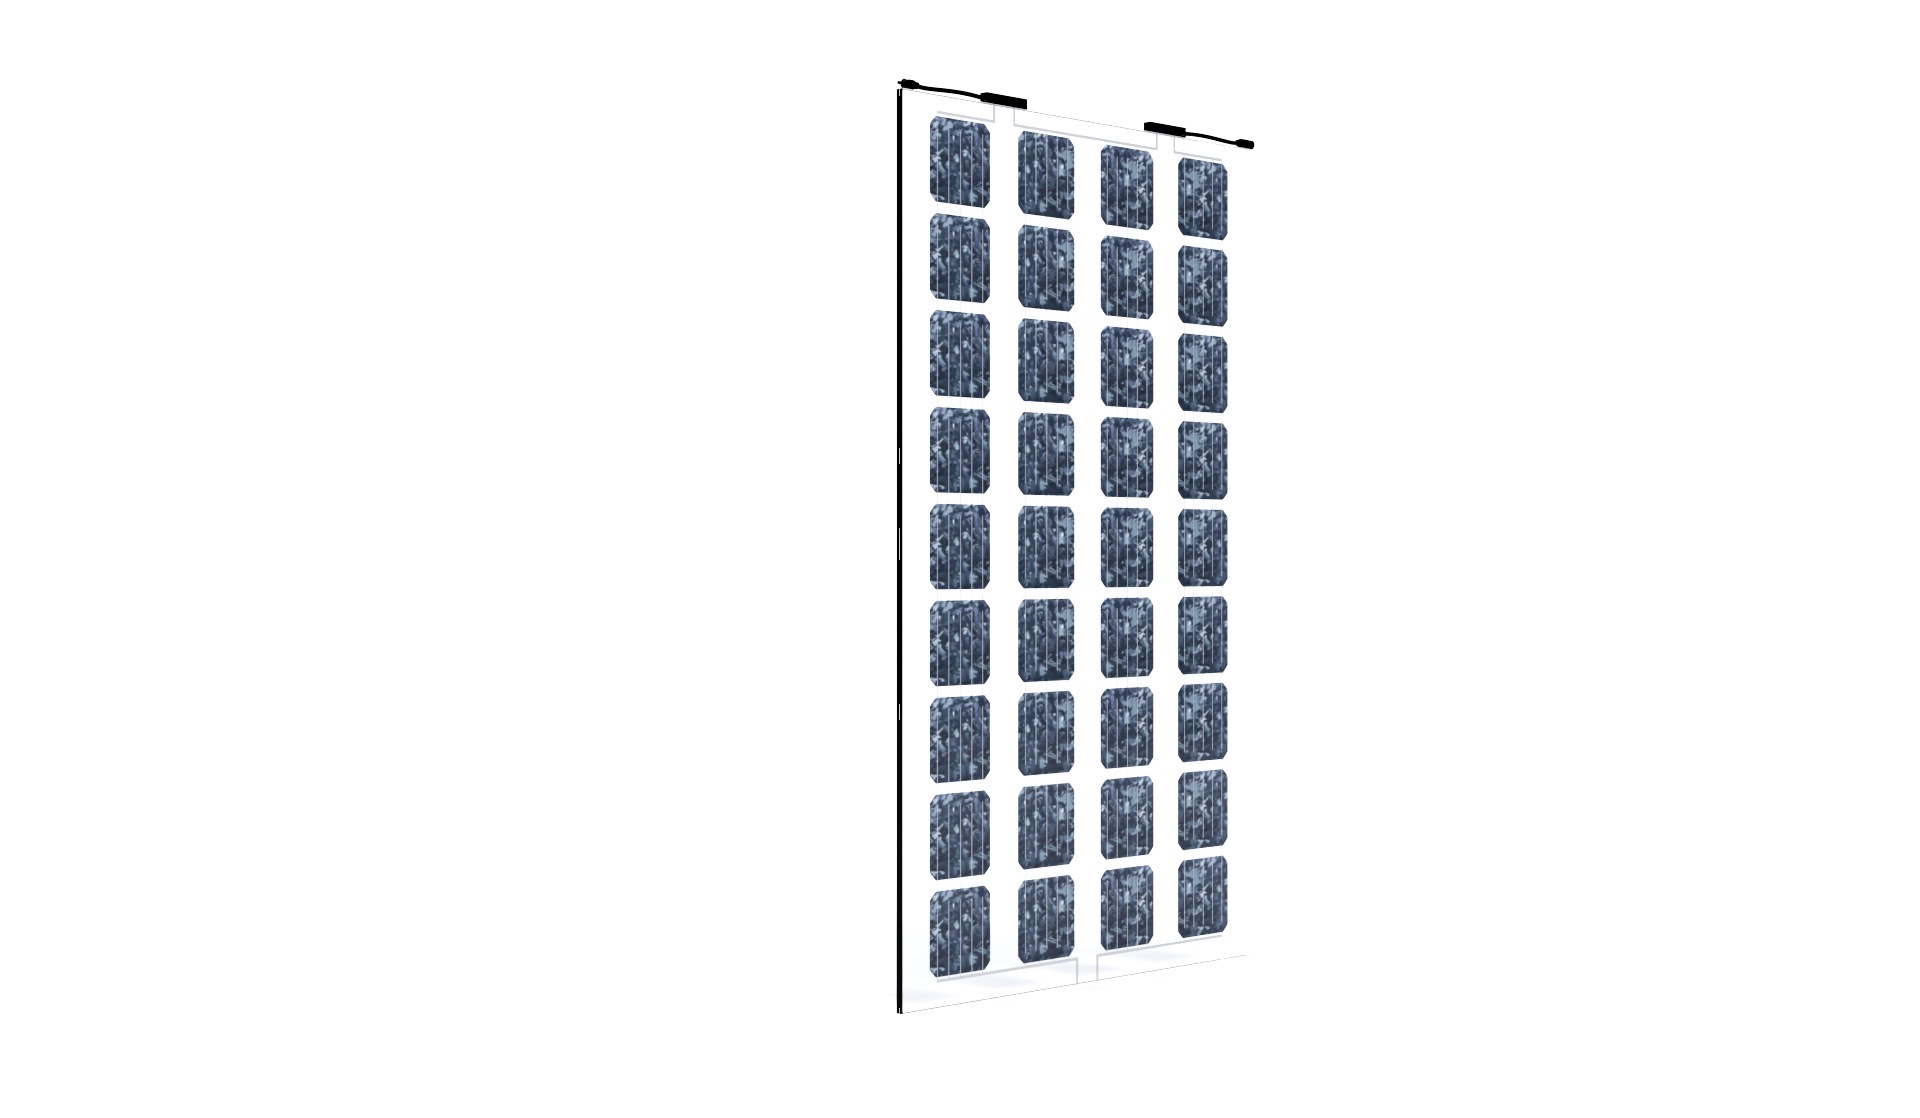 Monocrystalline high performance cell with special EVA package Front glass 4.0 mm SPV solar glass, microstructured, nano-coated, anti-reflective surface Rear glass 4.0 mm TVG safety glass Dimensions H=1069mm, W=520mm, H=9/24mm , Weight 11kg Junction box split IP68, MC4 connector, 800mm cable length, 4mm2